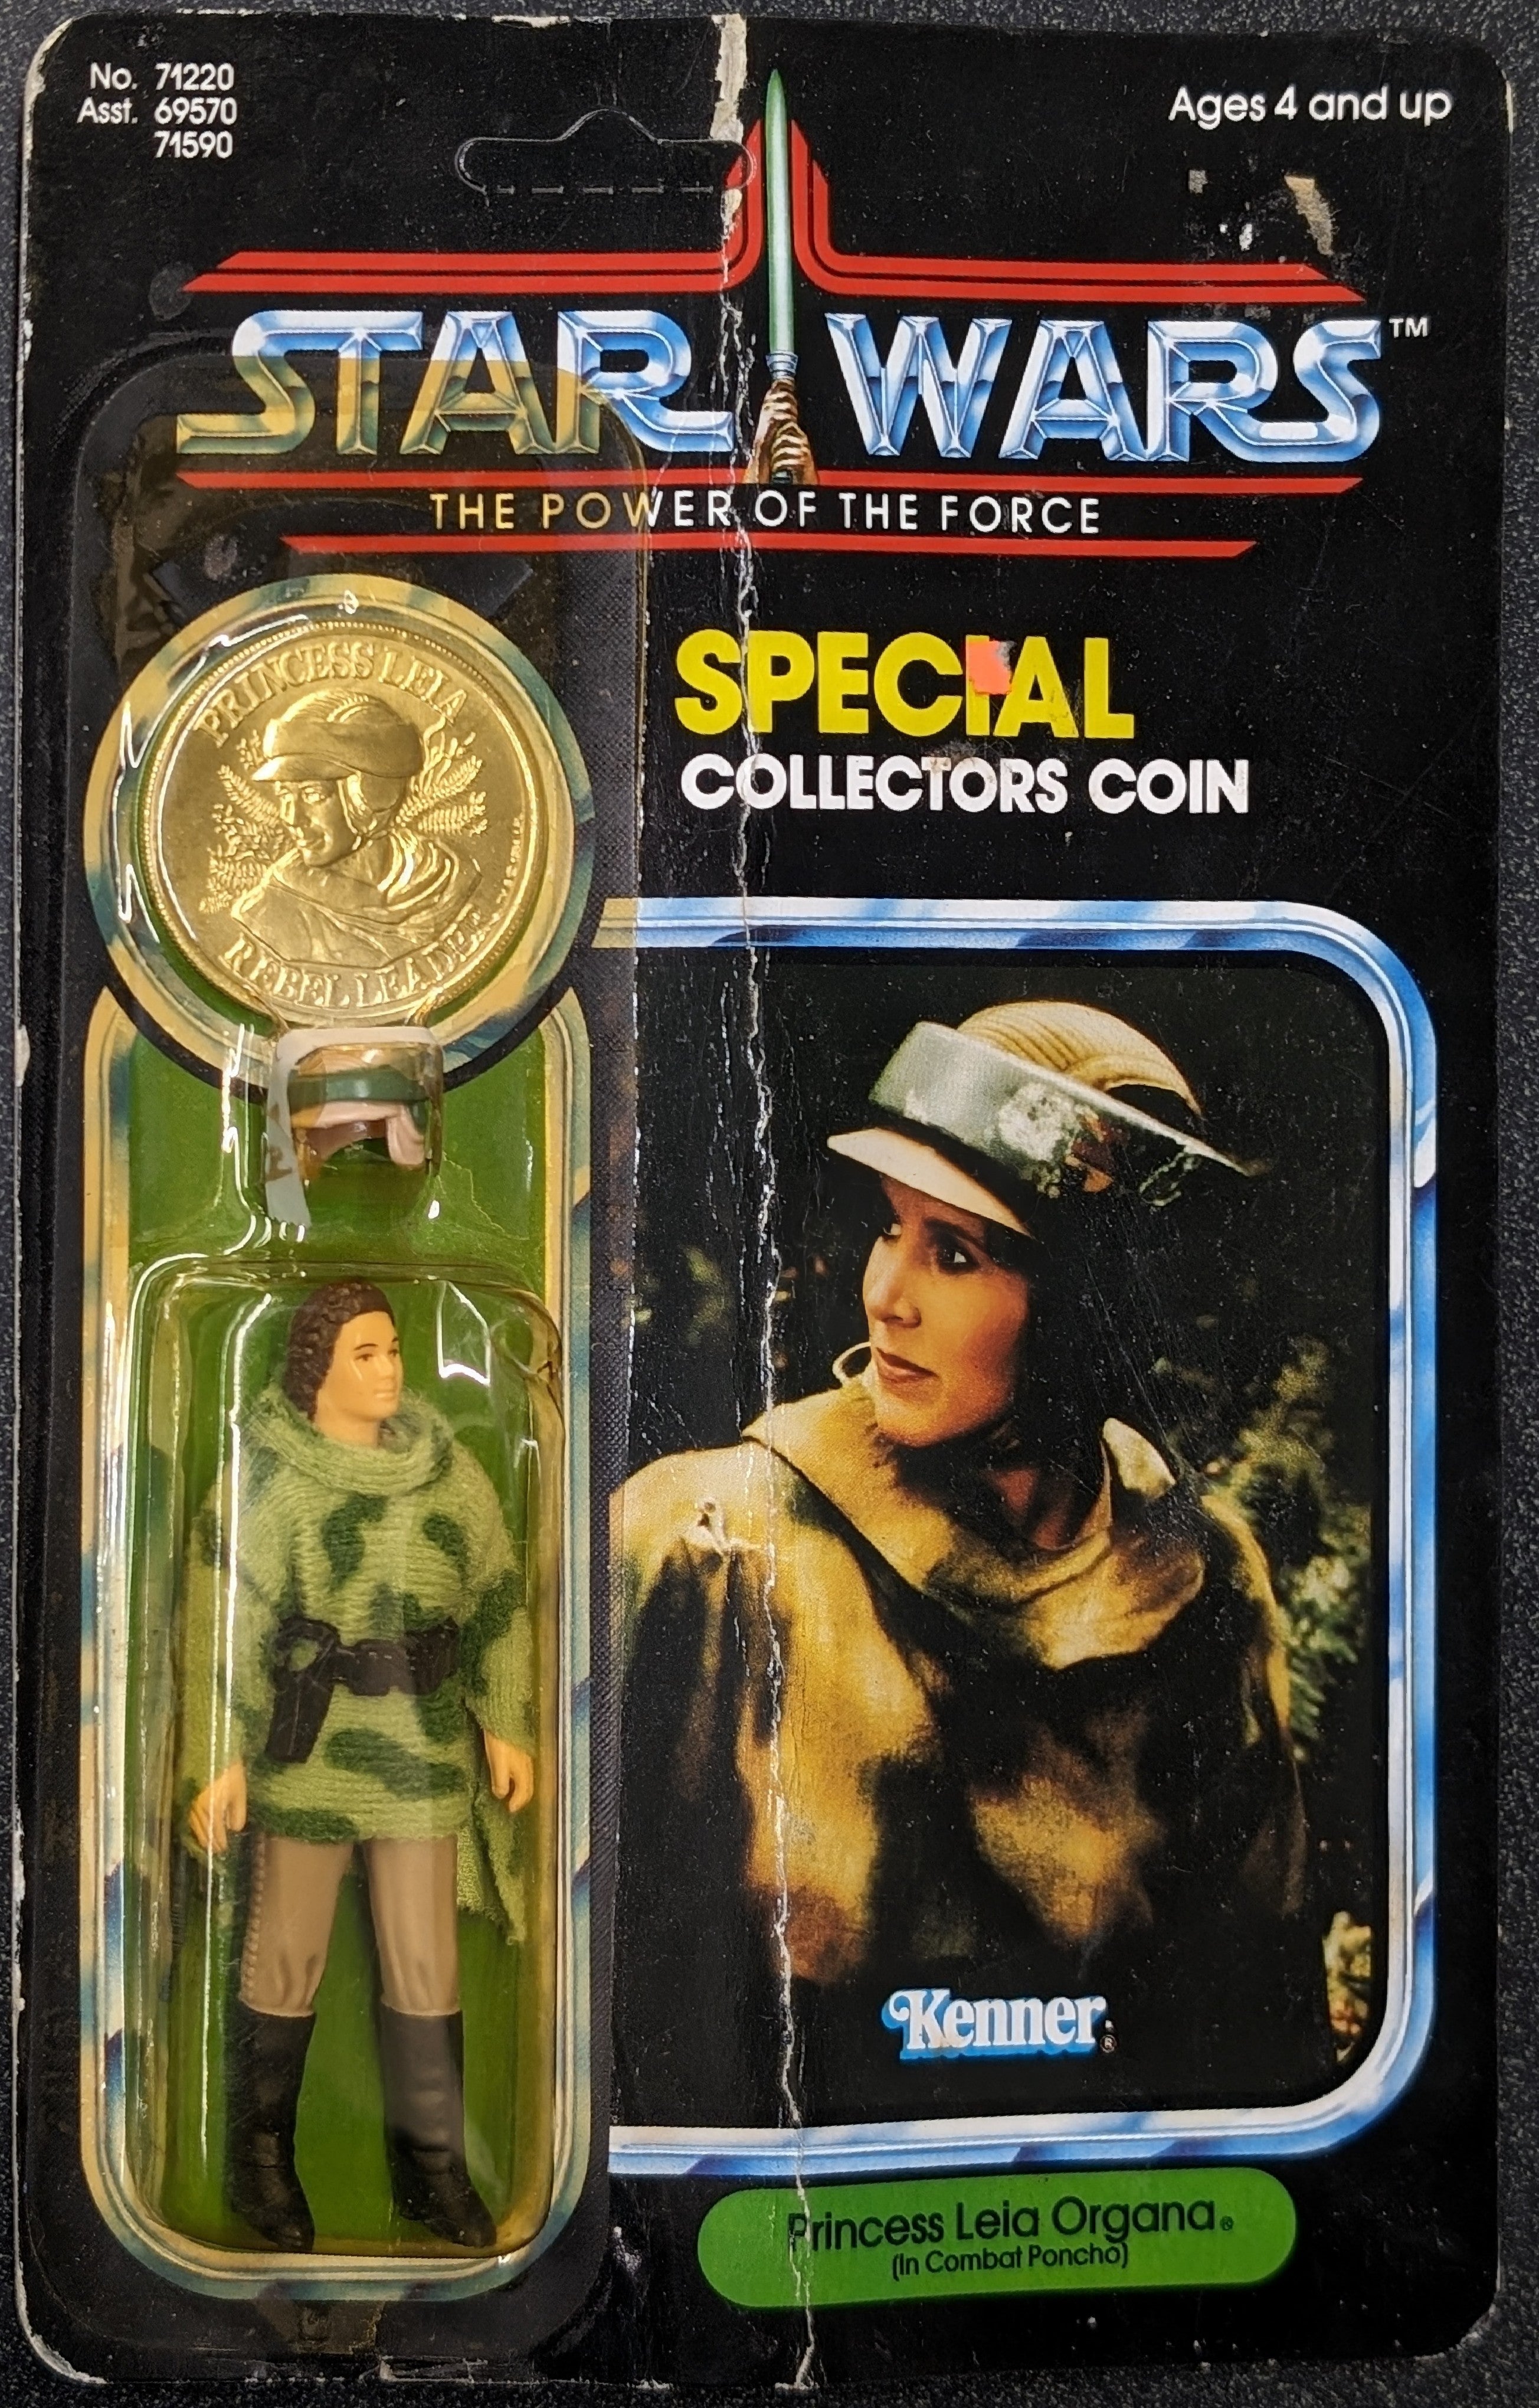 1984 Kenner Star Wars POTF Princess Leia Organa In Combat Poncho with Coin